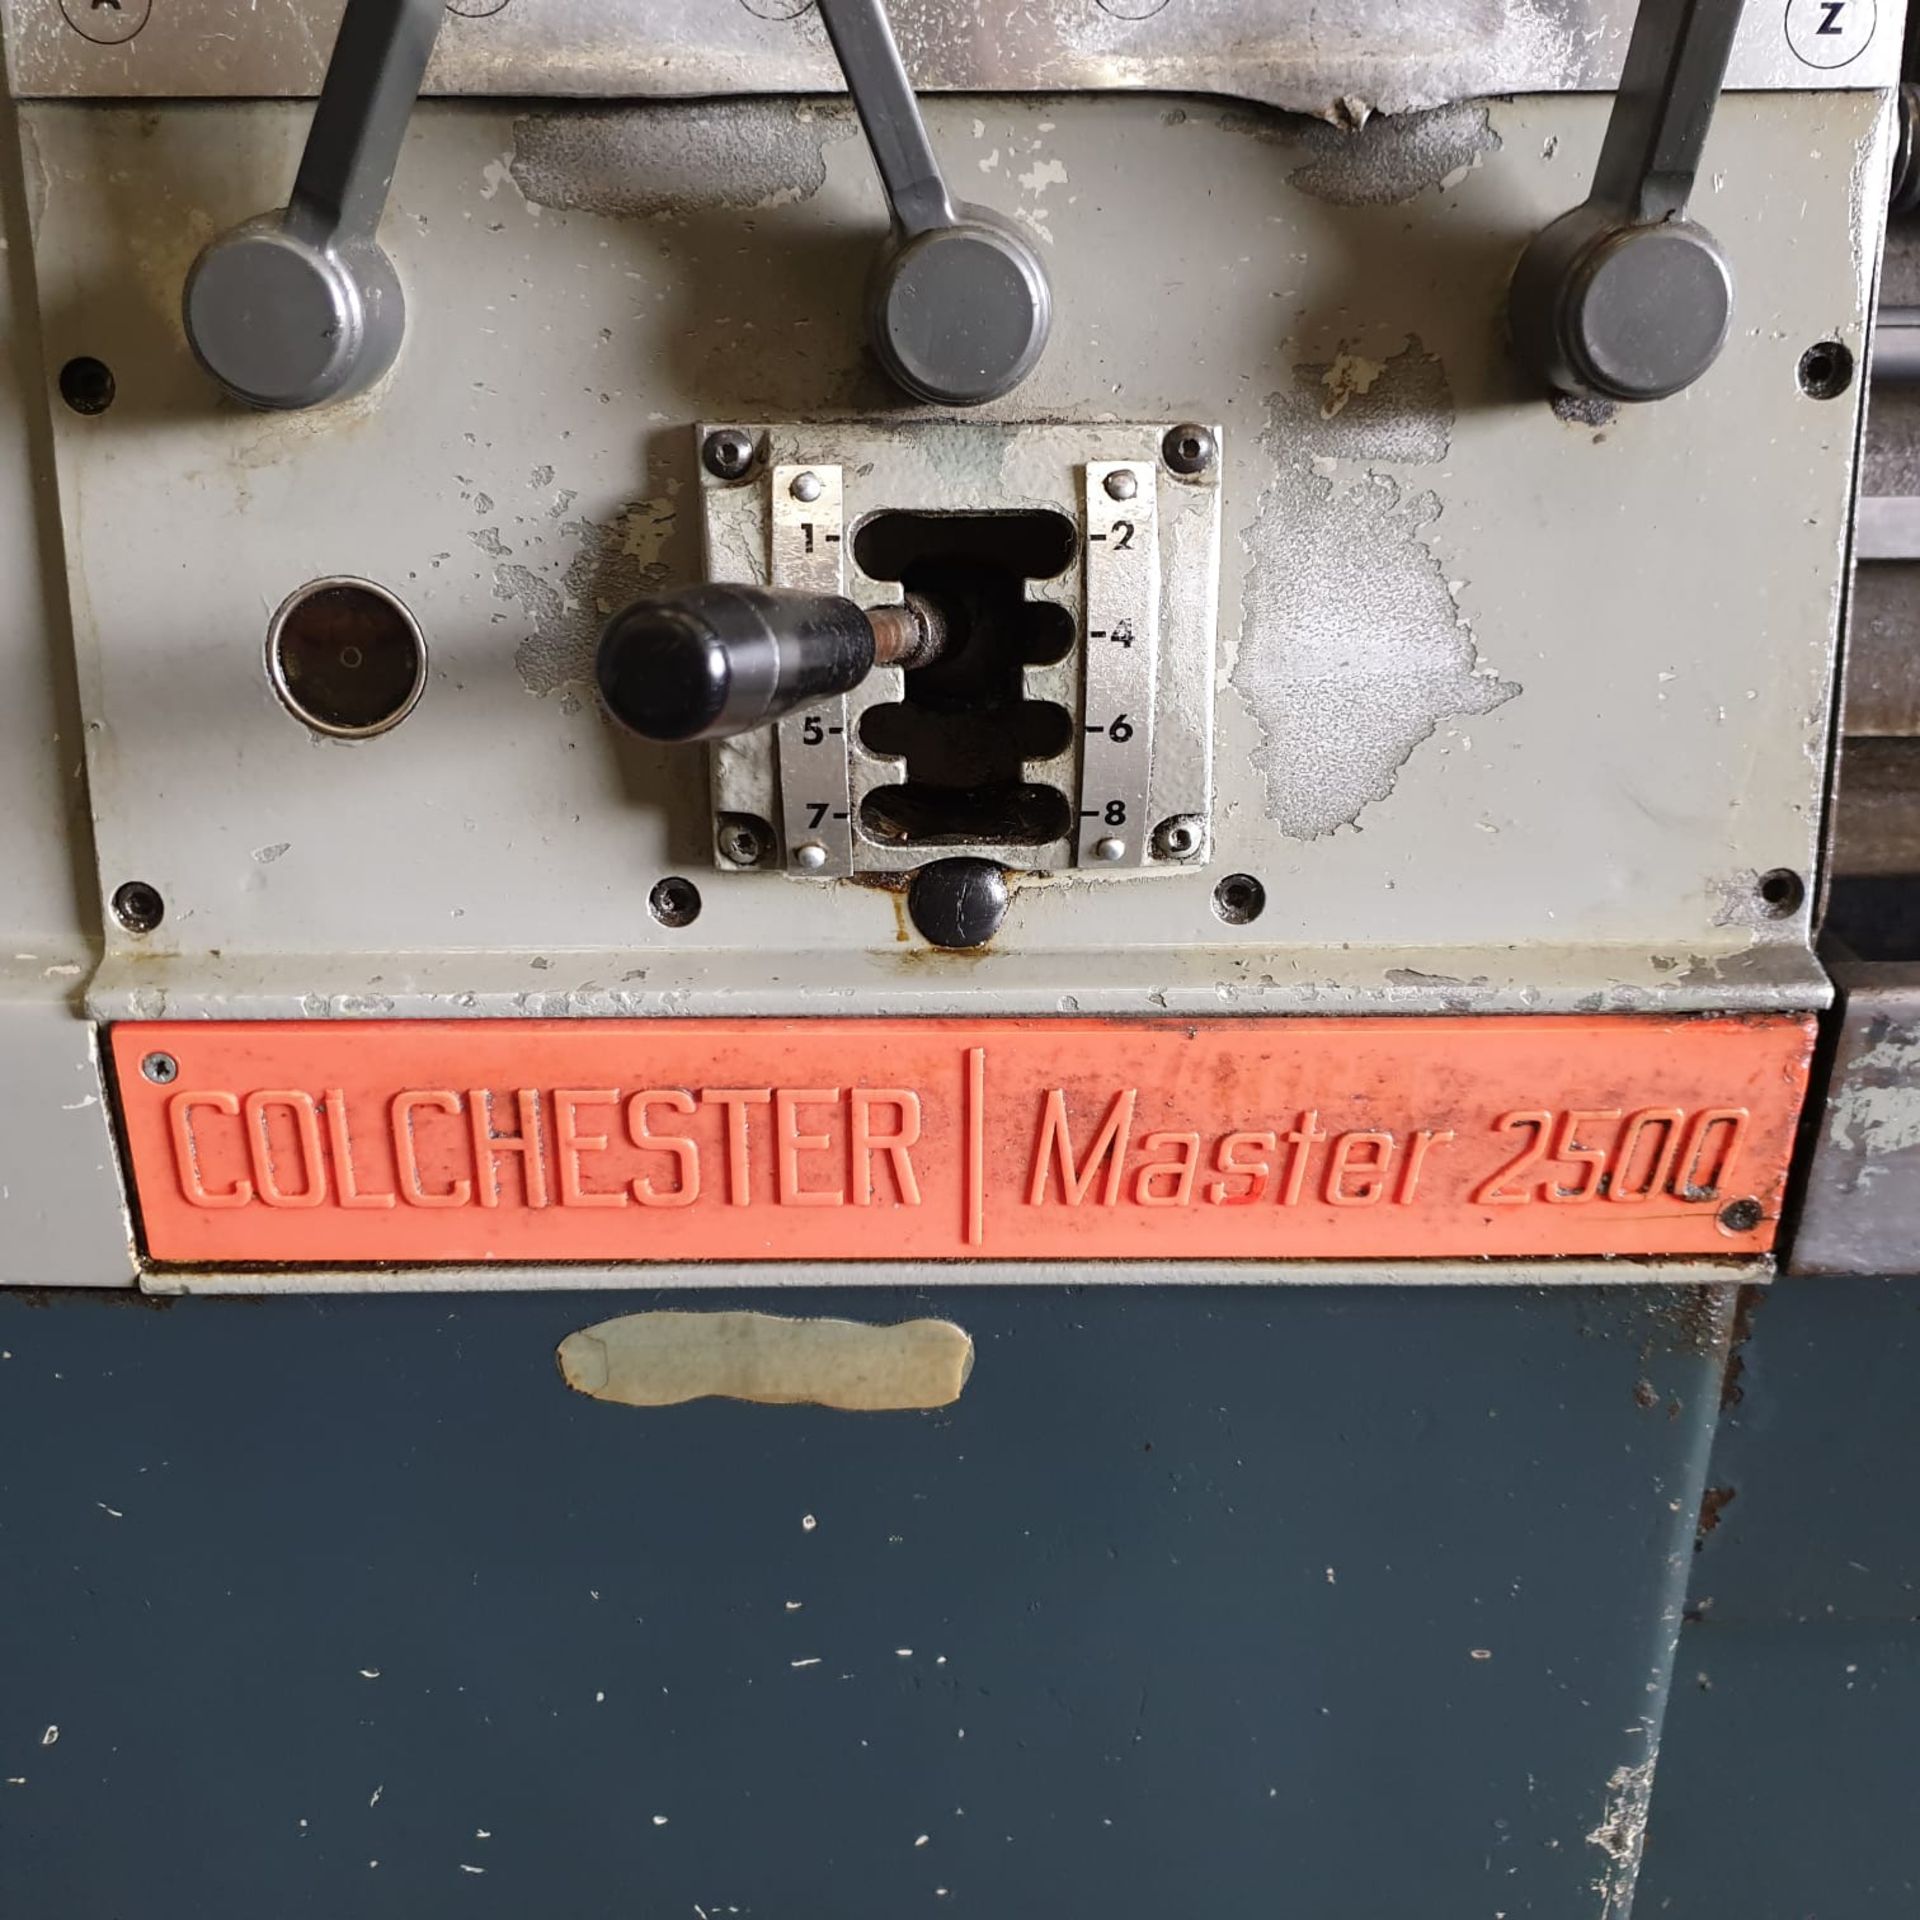 Colchester Master 2500. Gap Bed Centre Lathe. Distance Between Centres 25". Swing Over Bed 13 1/4". - Image 9 of 11